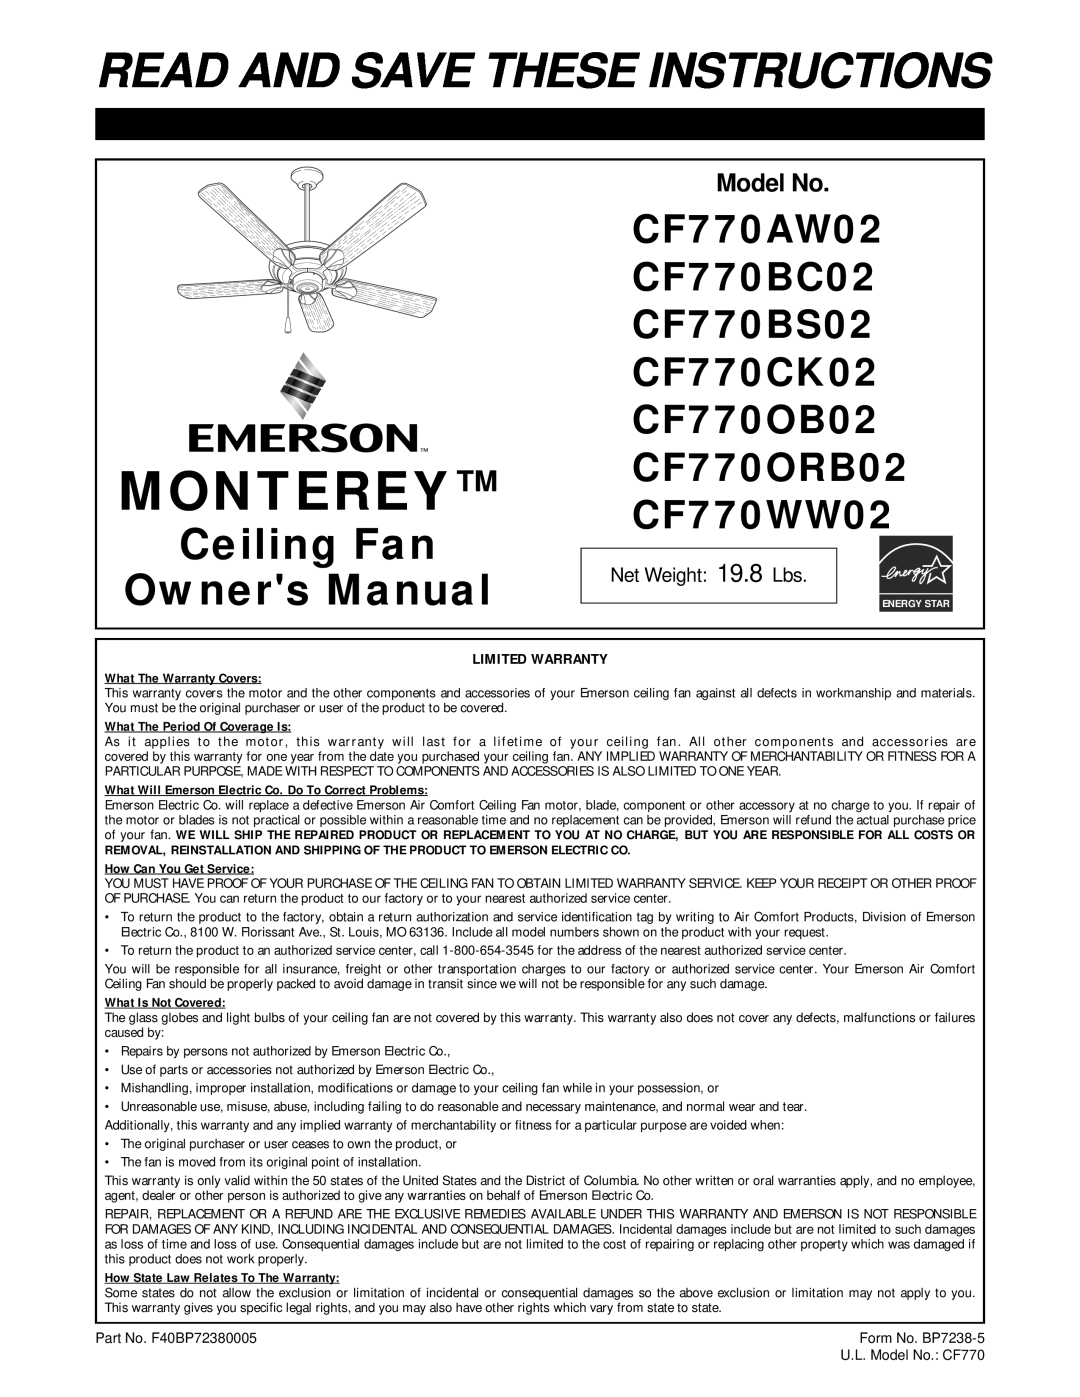 Emerson CF770CK02 warranty Model No, Monterey, Read And Save These Instructions, CF770ORB02 CF770WW02, What Is Not Covered 